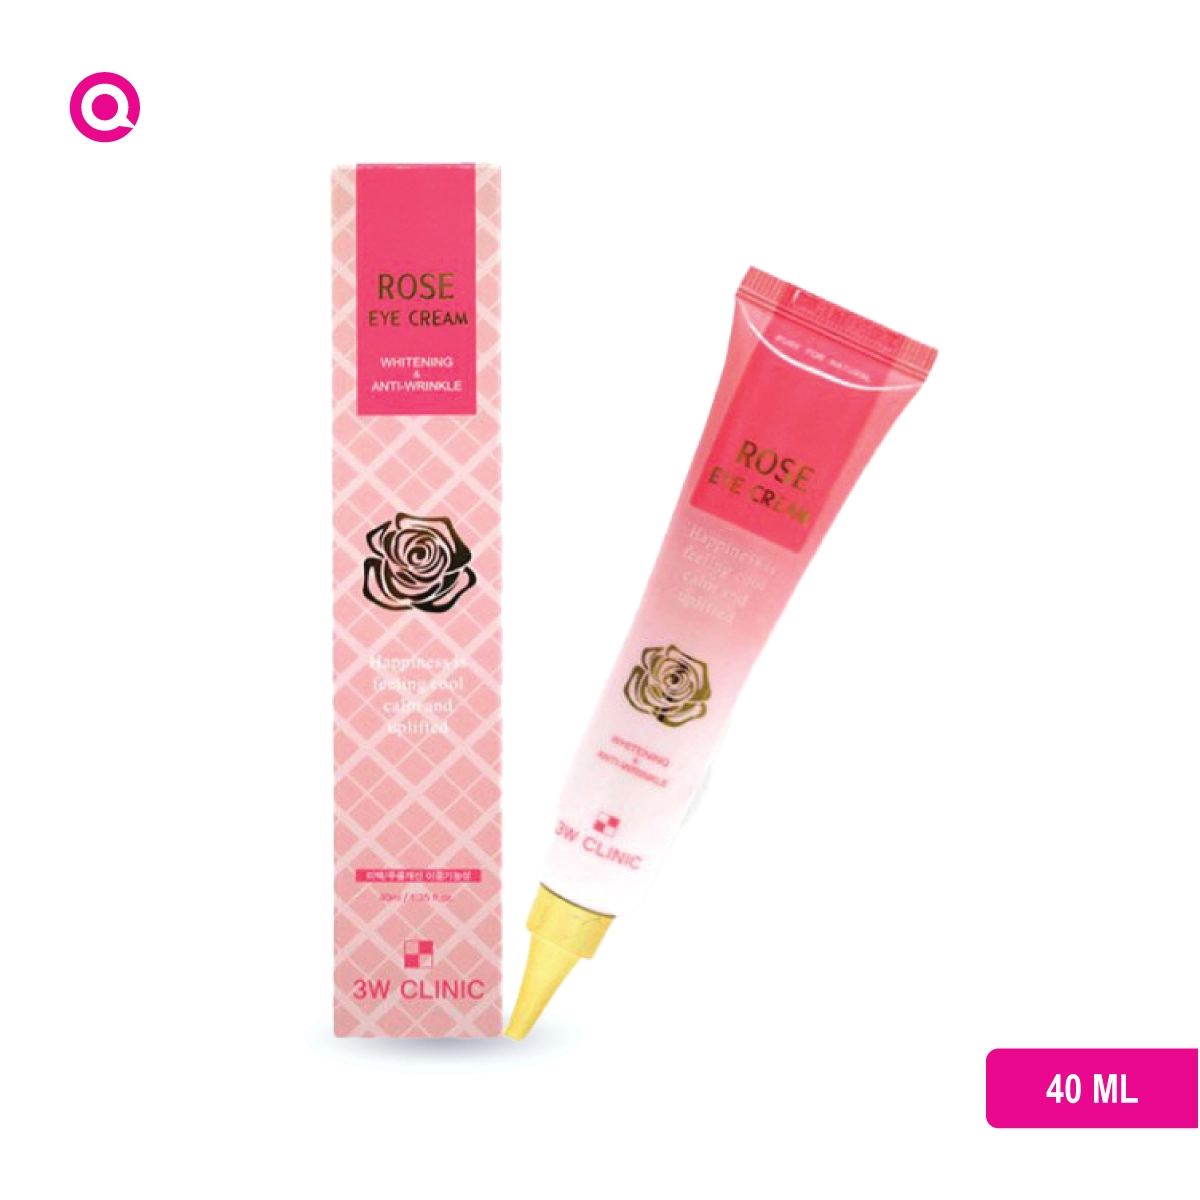 A radiant eye surrounded by roses - Capturing the essence of 3W Clinic Rose Eye Cream Anti-Wrinkle 40ml.-02